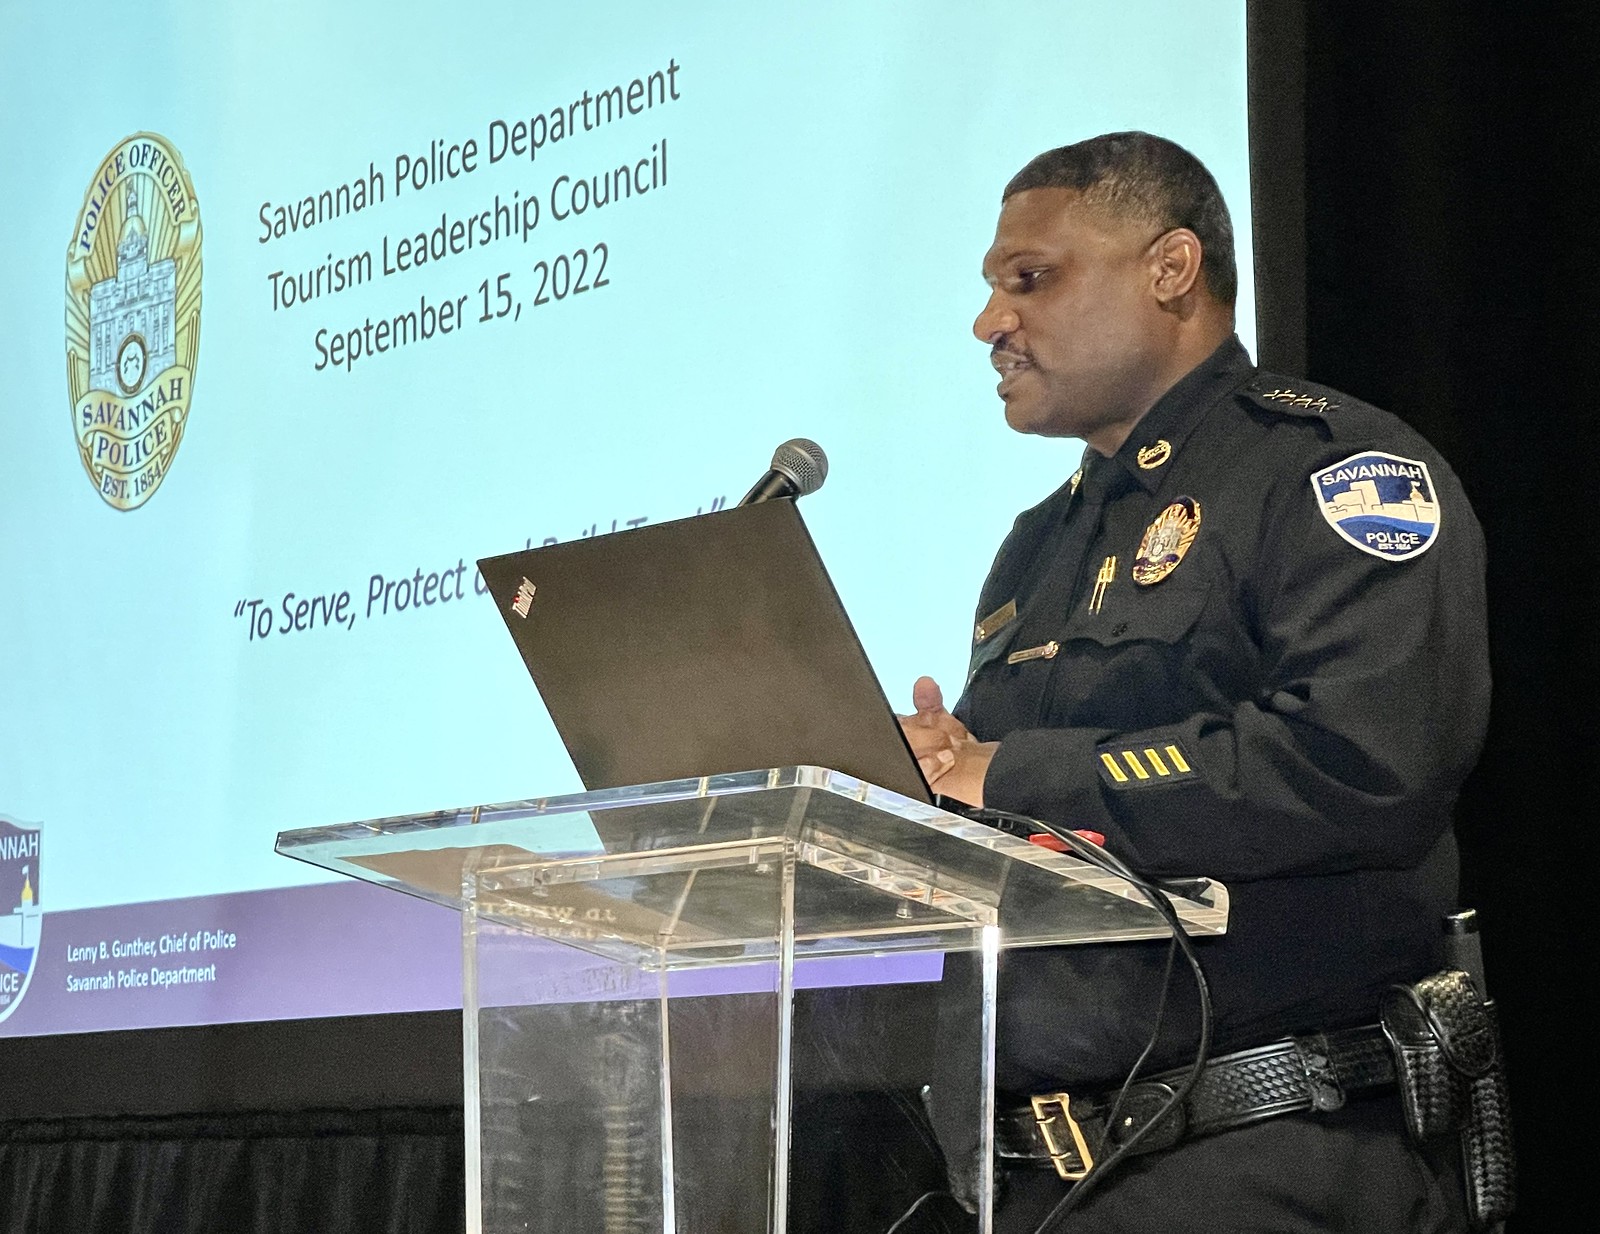 Tourism Leadership Council Host SPD Chief Lenny Gunther